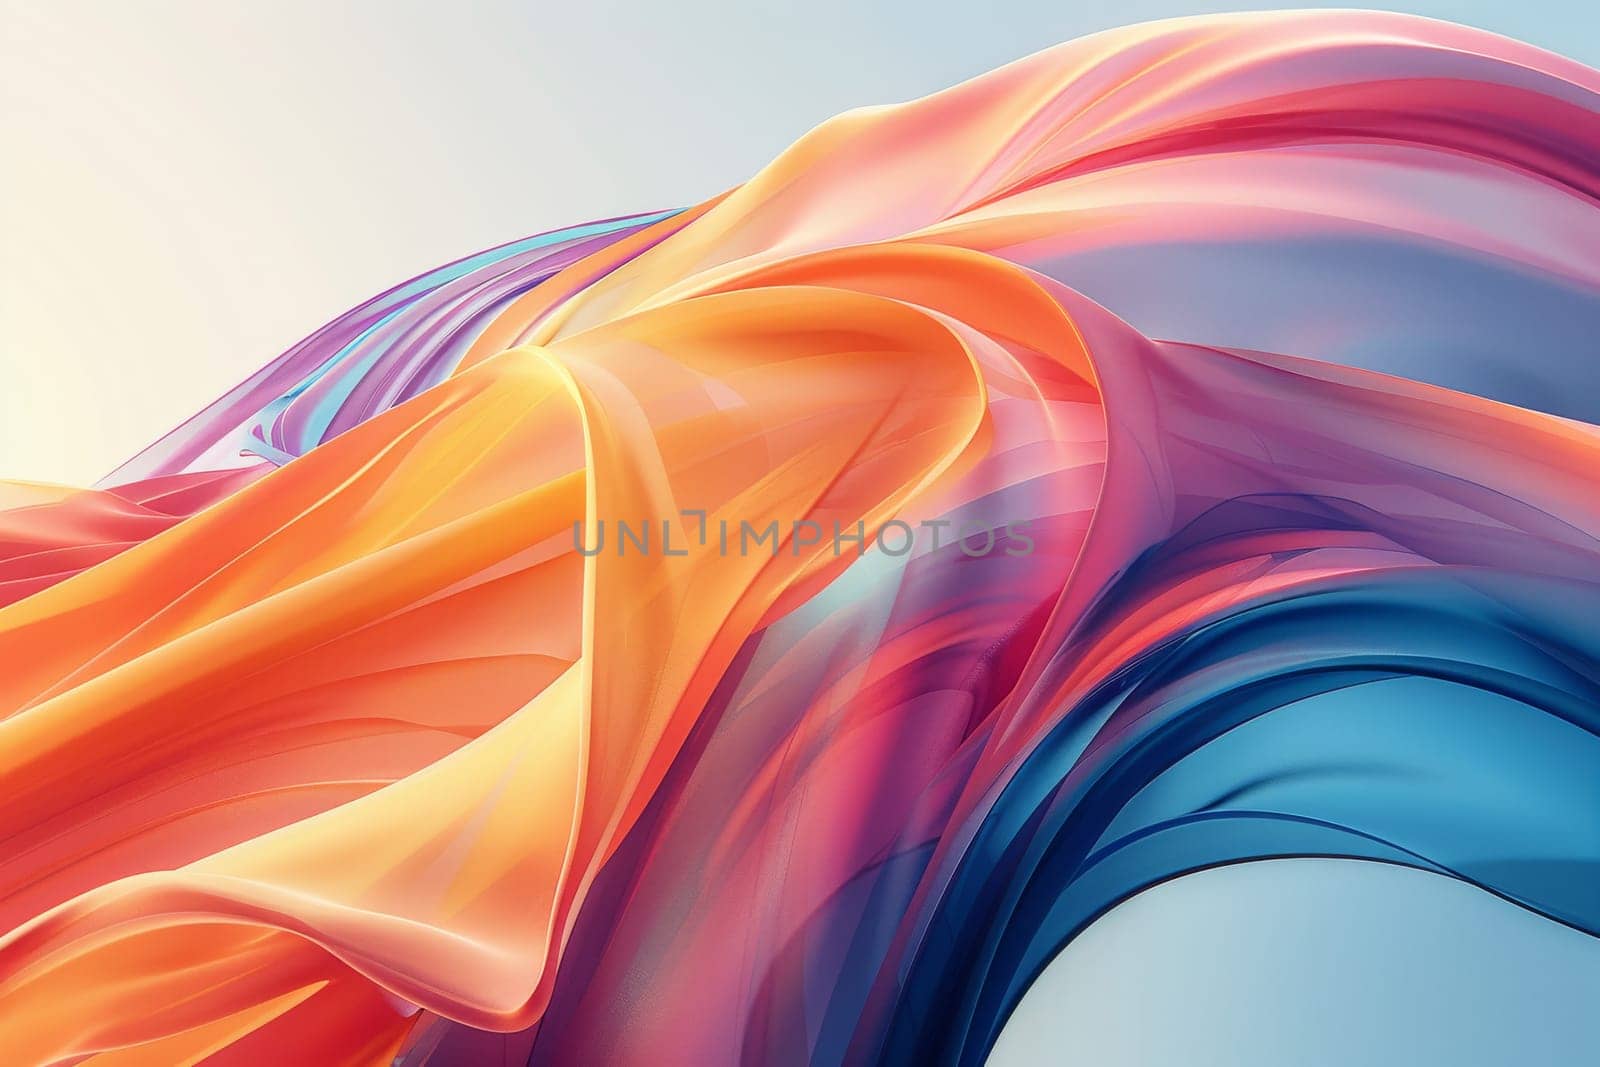 A colorful, flowing piece of fabric with a blue and orange stripe. The colors are vibrant and the fabric appears to be flowing in a wave-like motion